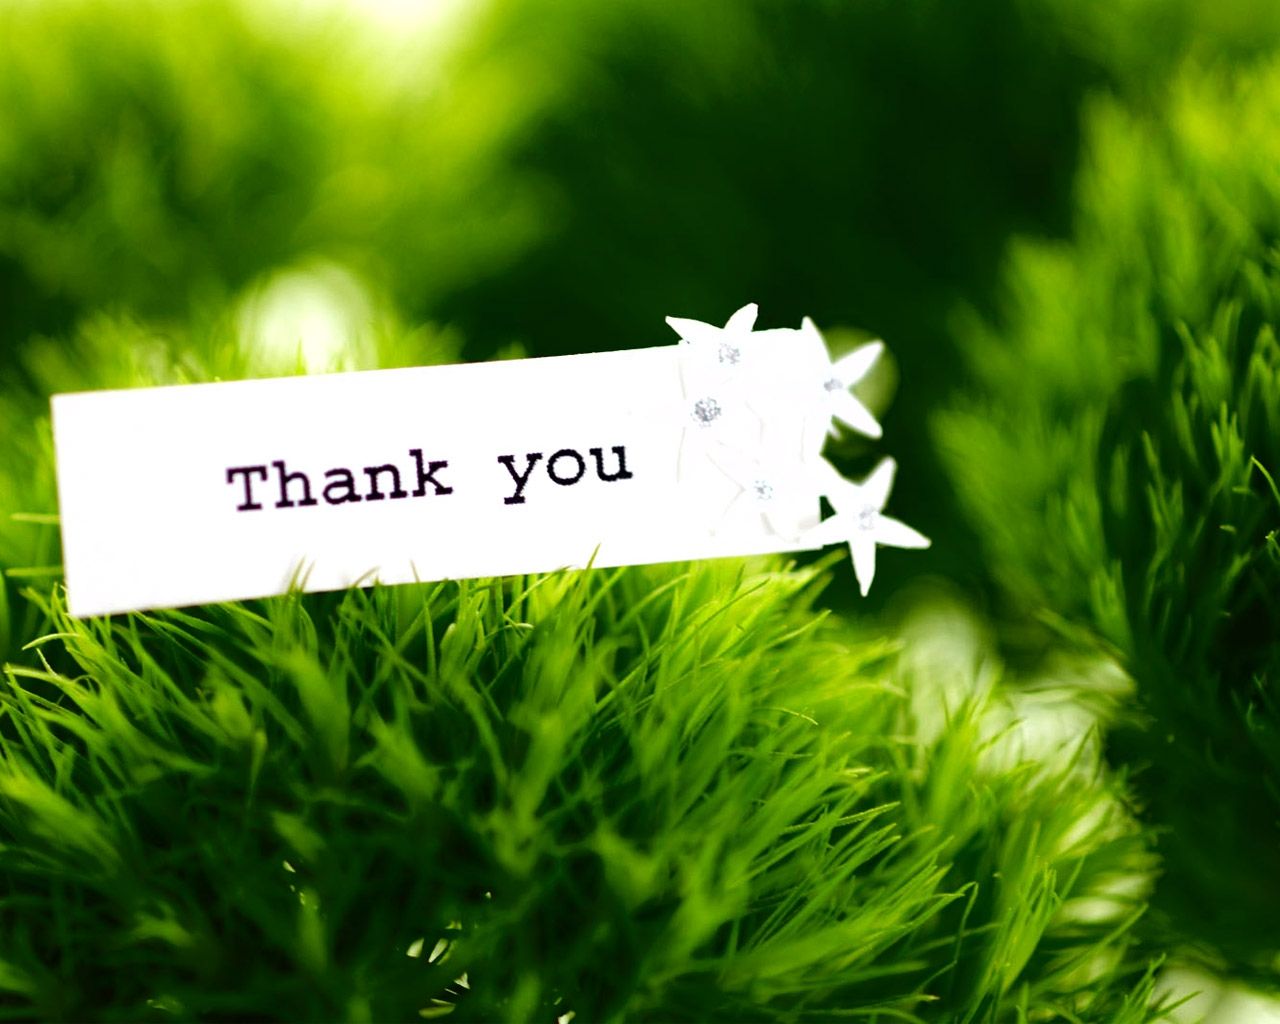 Free Thank You text pc hd wallpapers | Wallpapers Wide Free